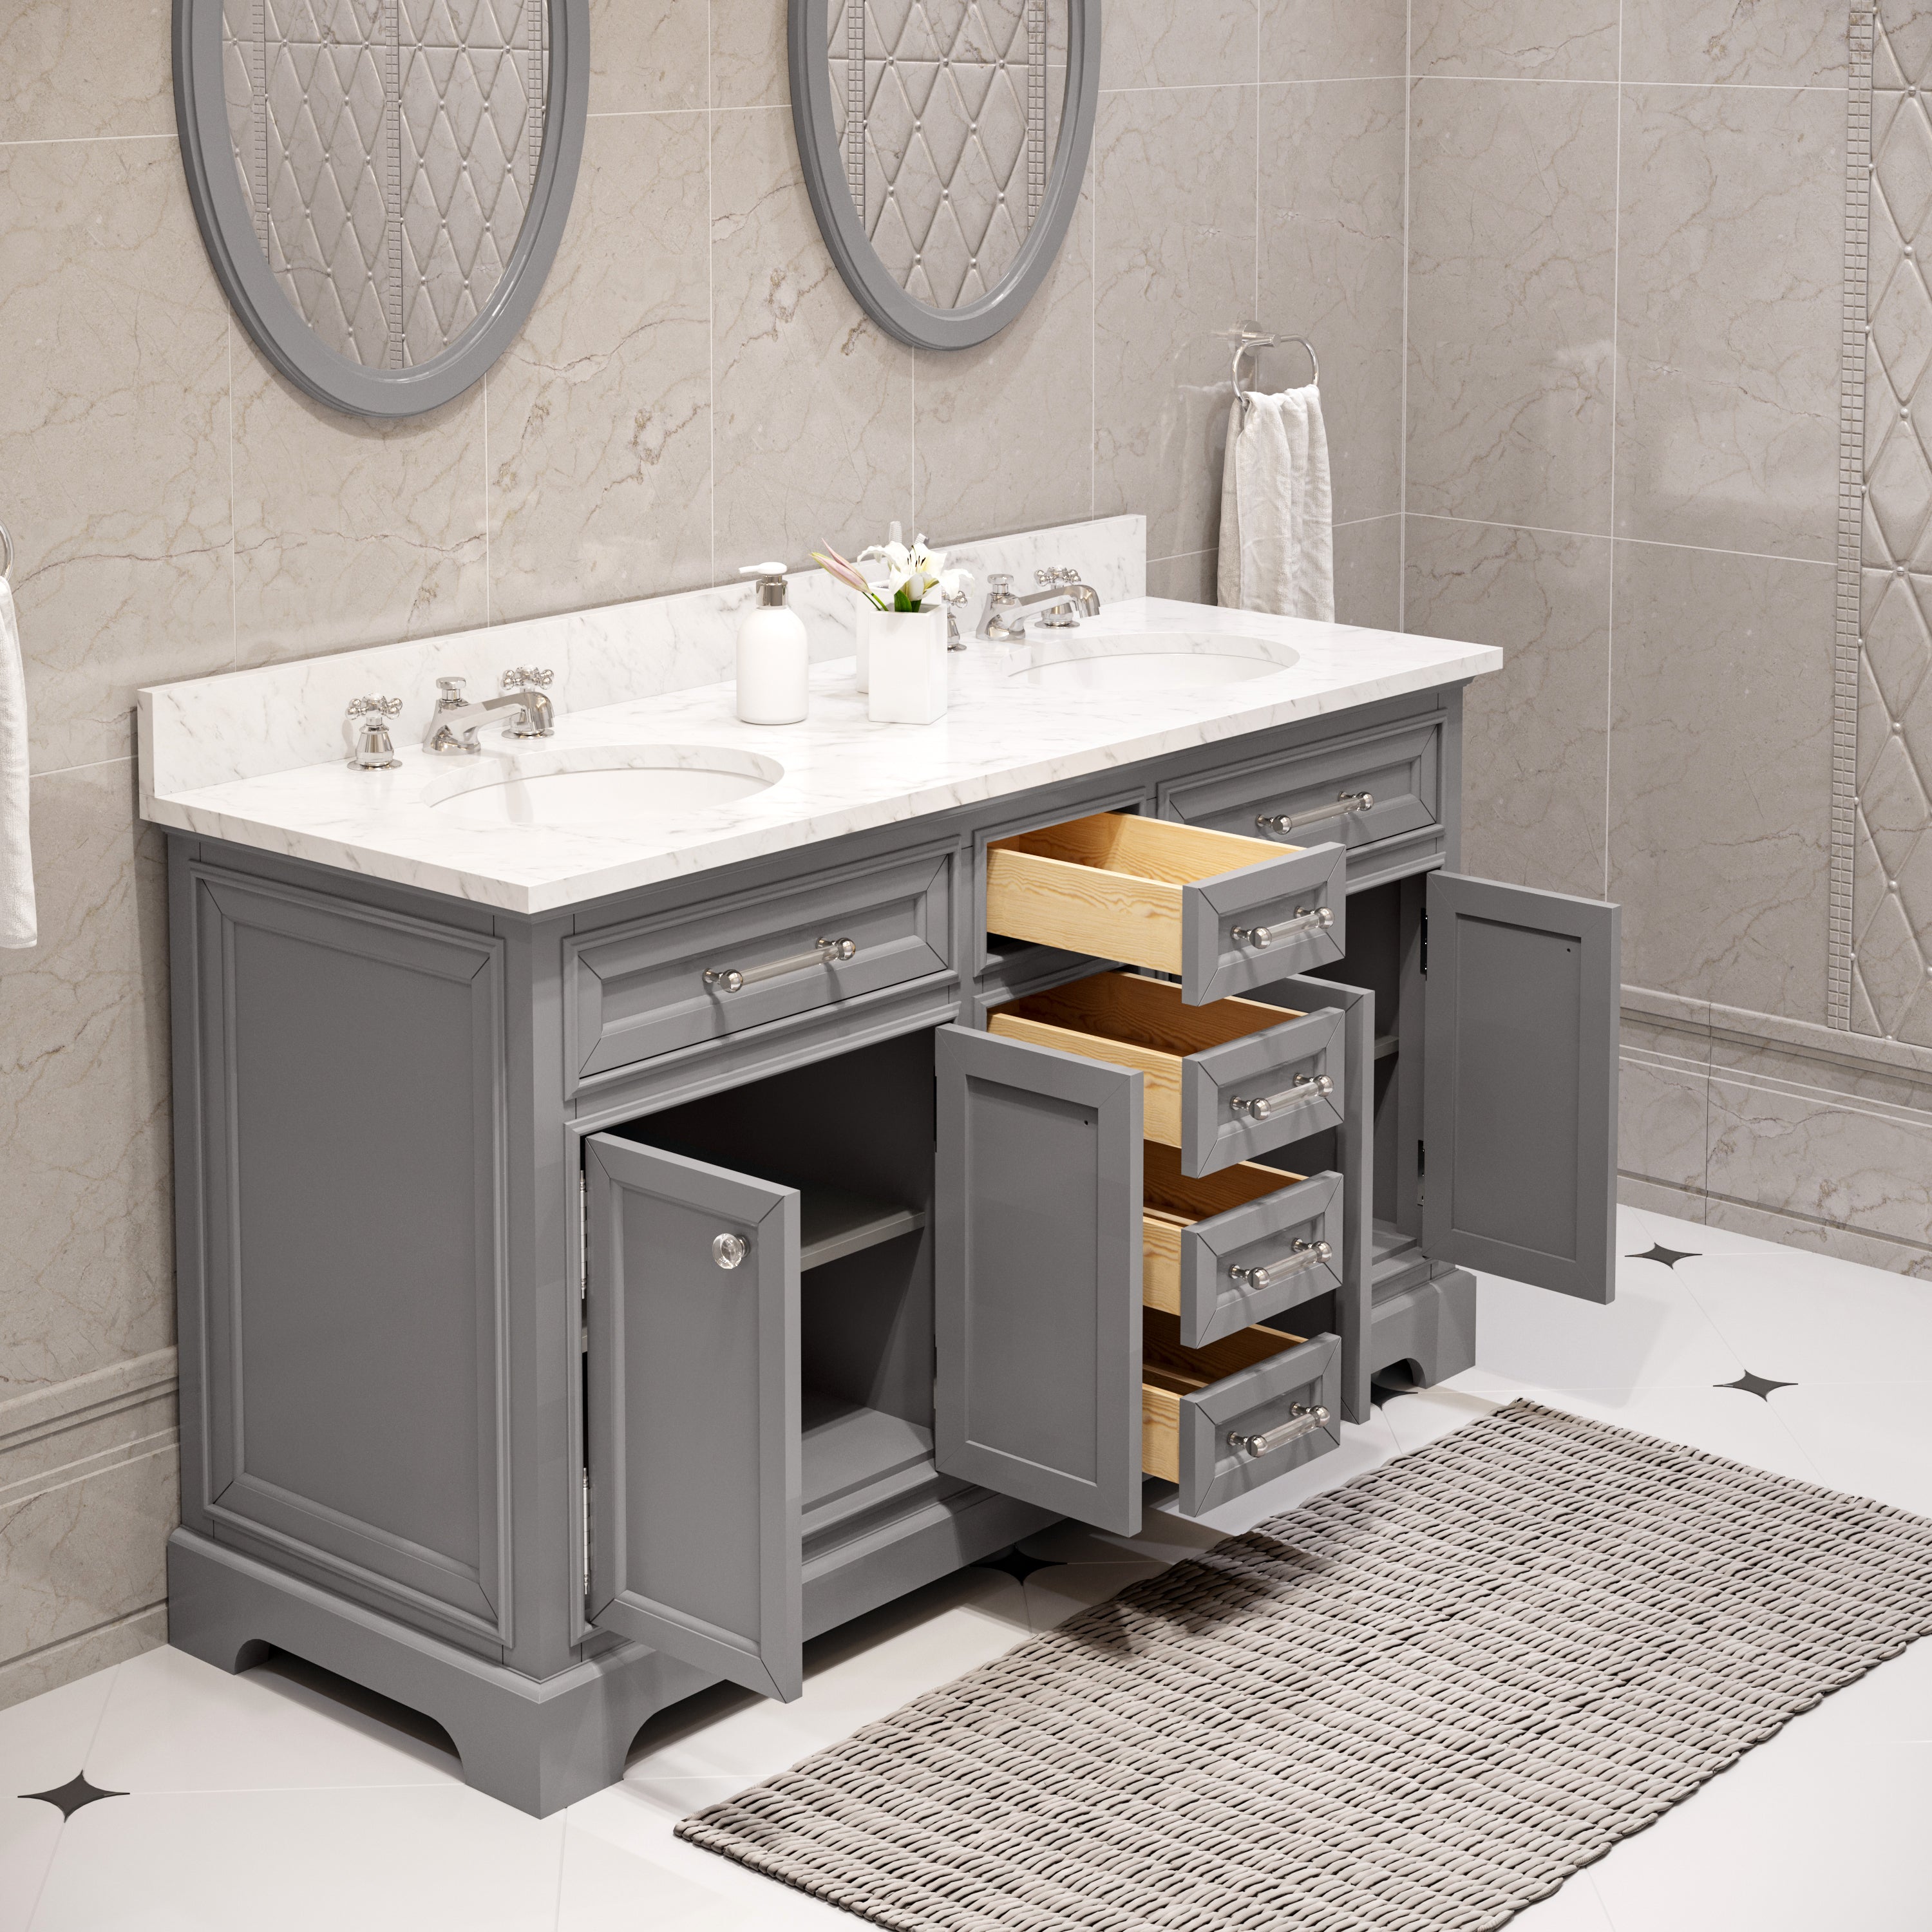 Water Creation | 60 Inch Cashmere Grey Double Sink Bathroom Vanity With Matching Framed Mirrors And Faucets From The Derby Collection | DE60CW01CG-O21BX0901